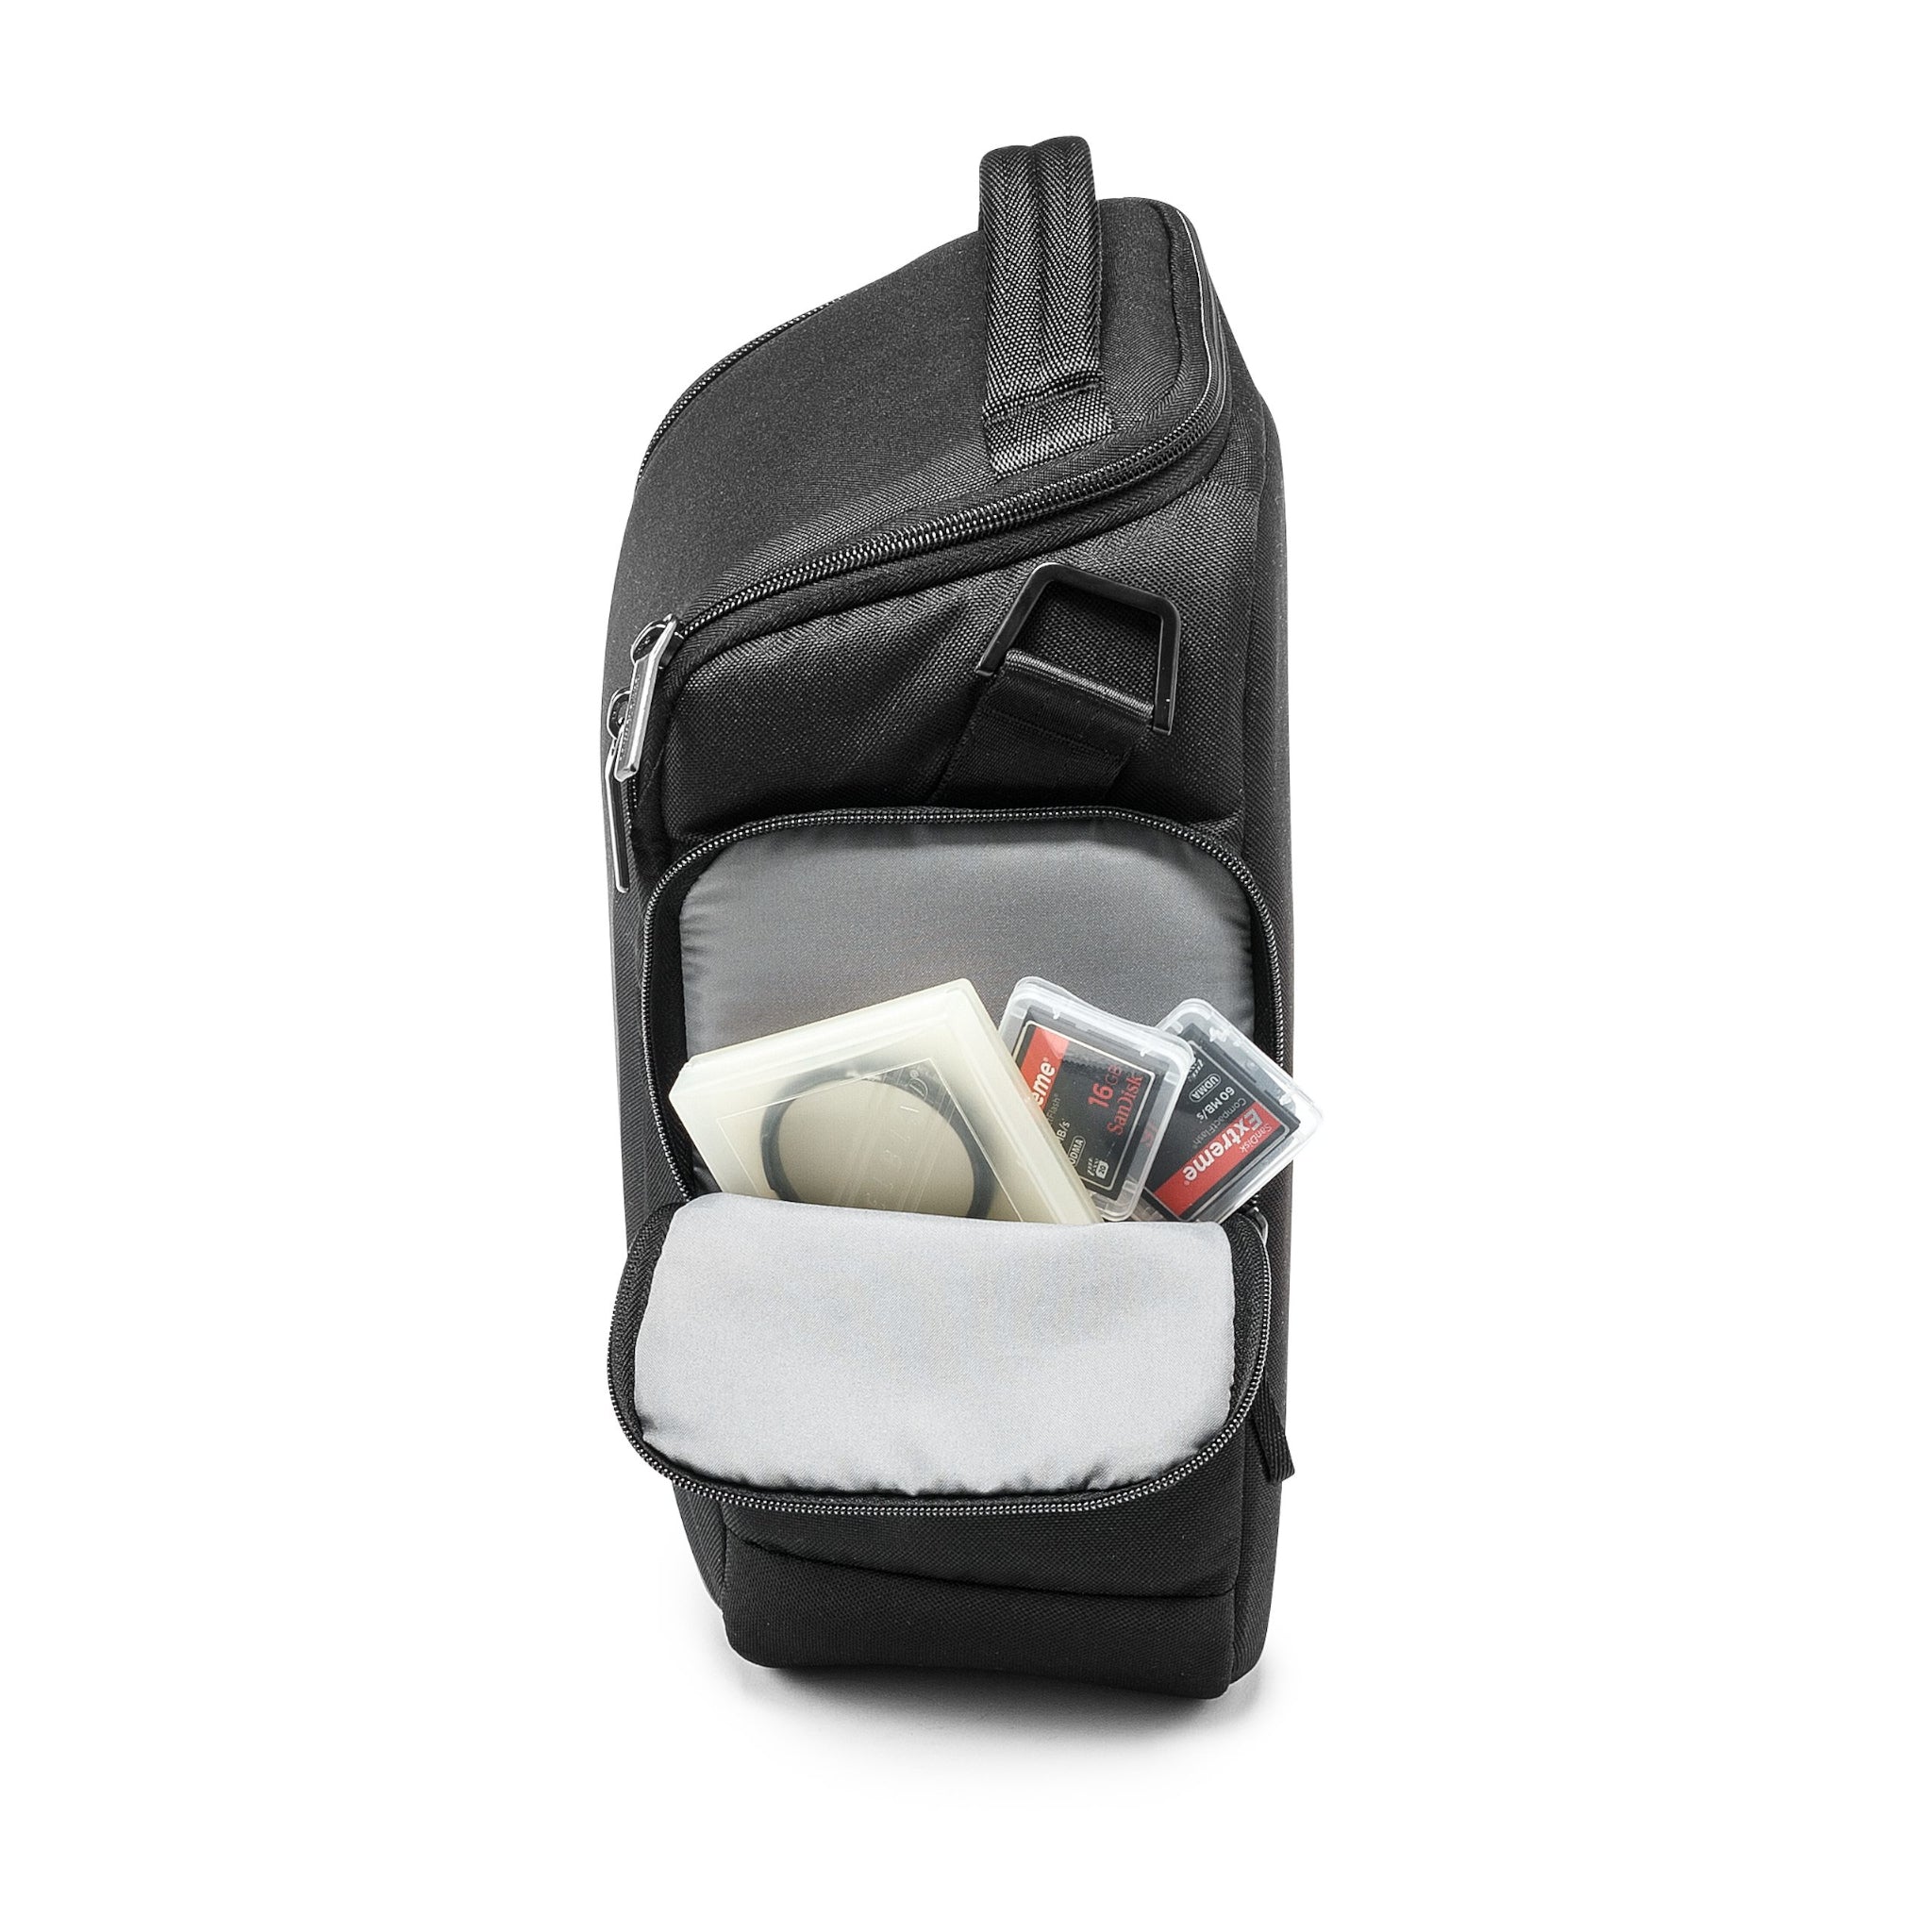 Manfrotto Camera bag Holster Plus 40 (Black)